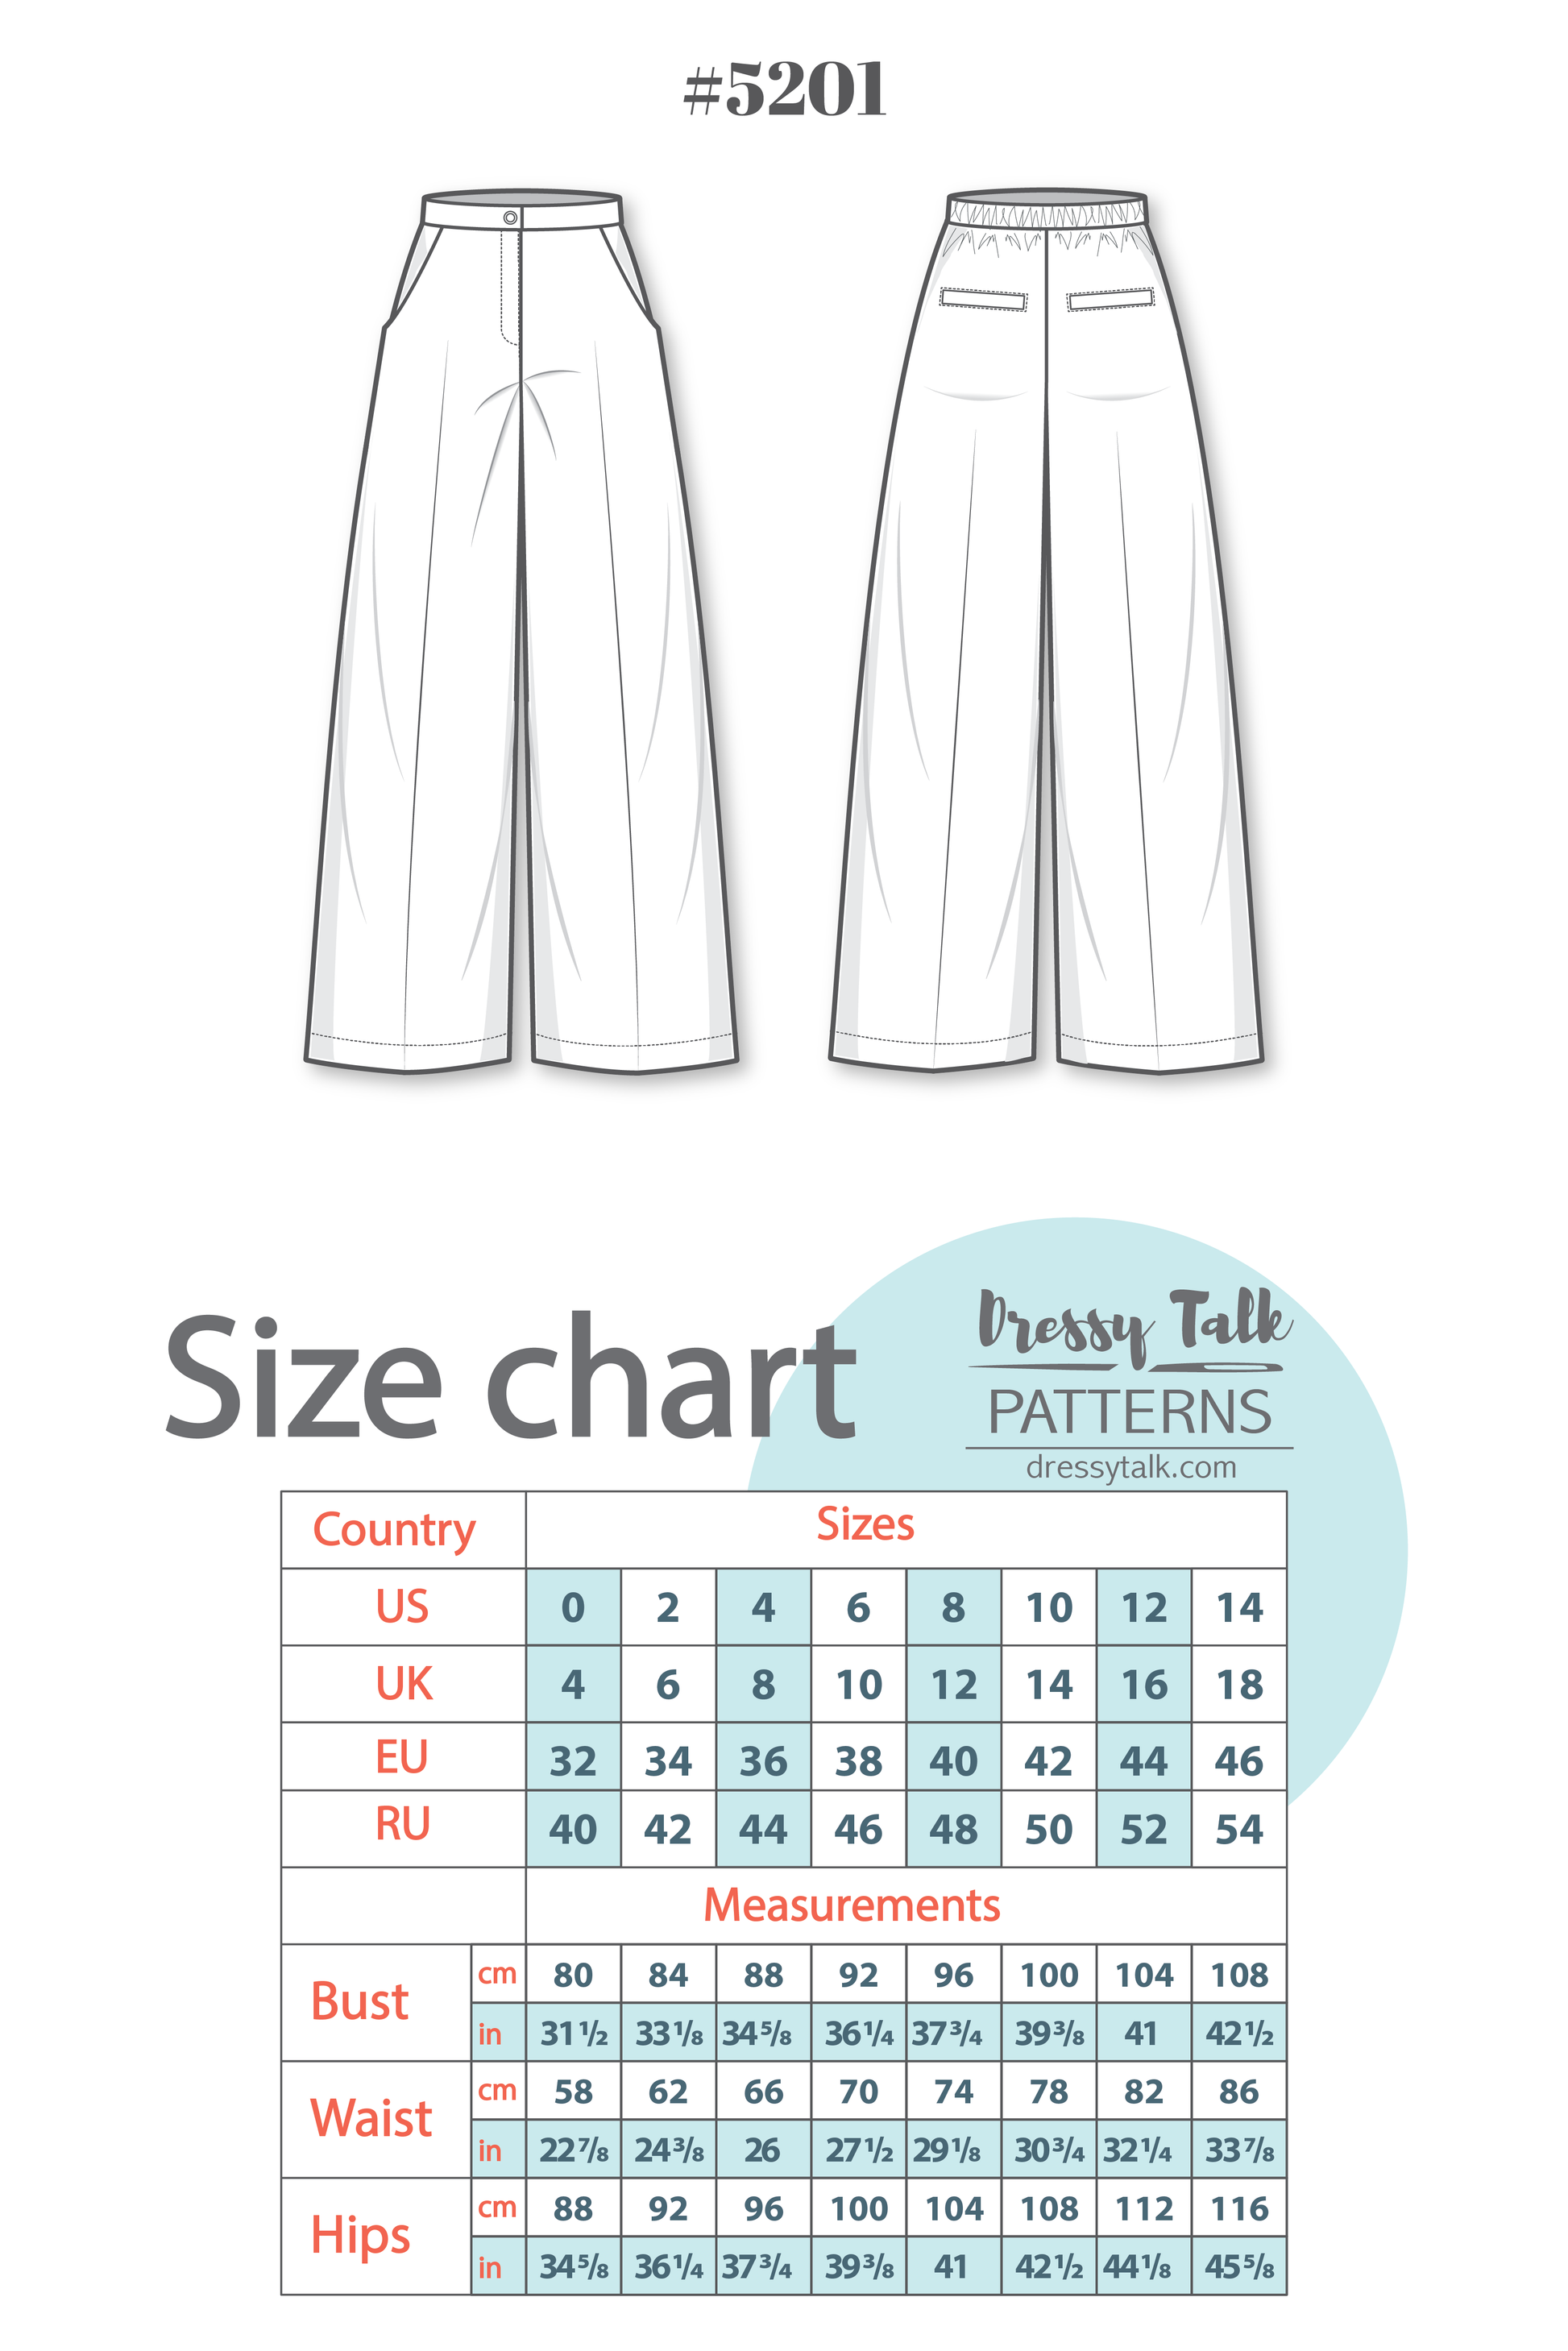 Flare Pants Sewing Pattern Custom Fit. Illustrated Sewing Instructions